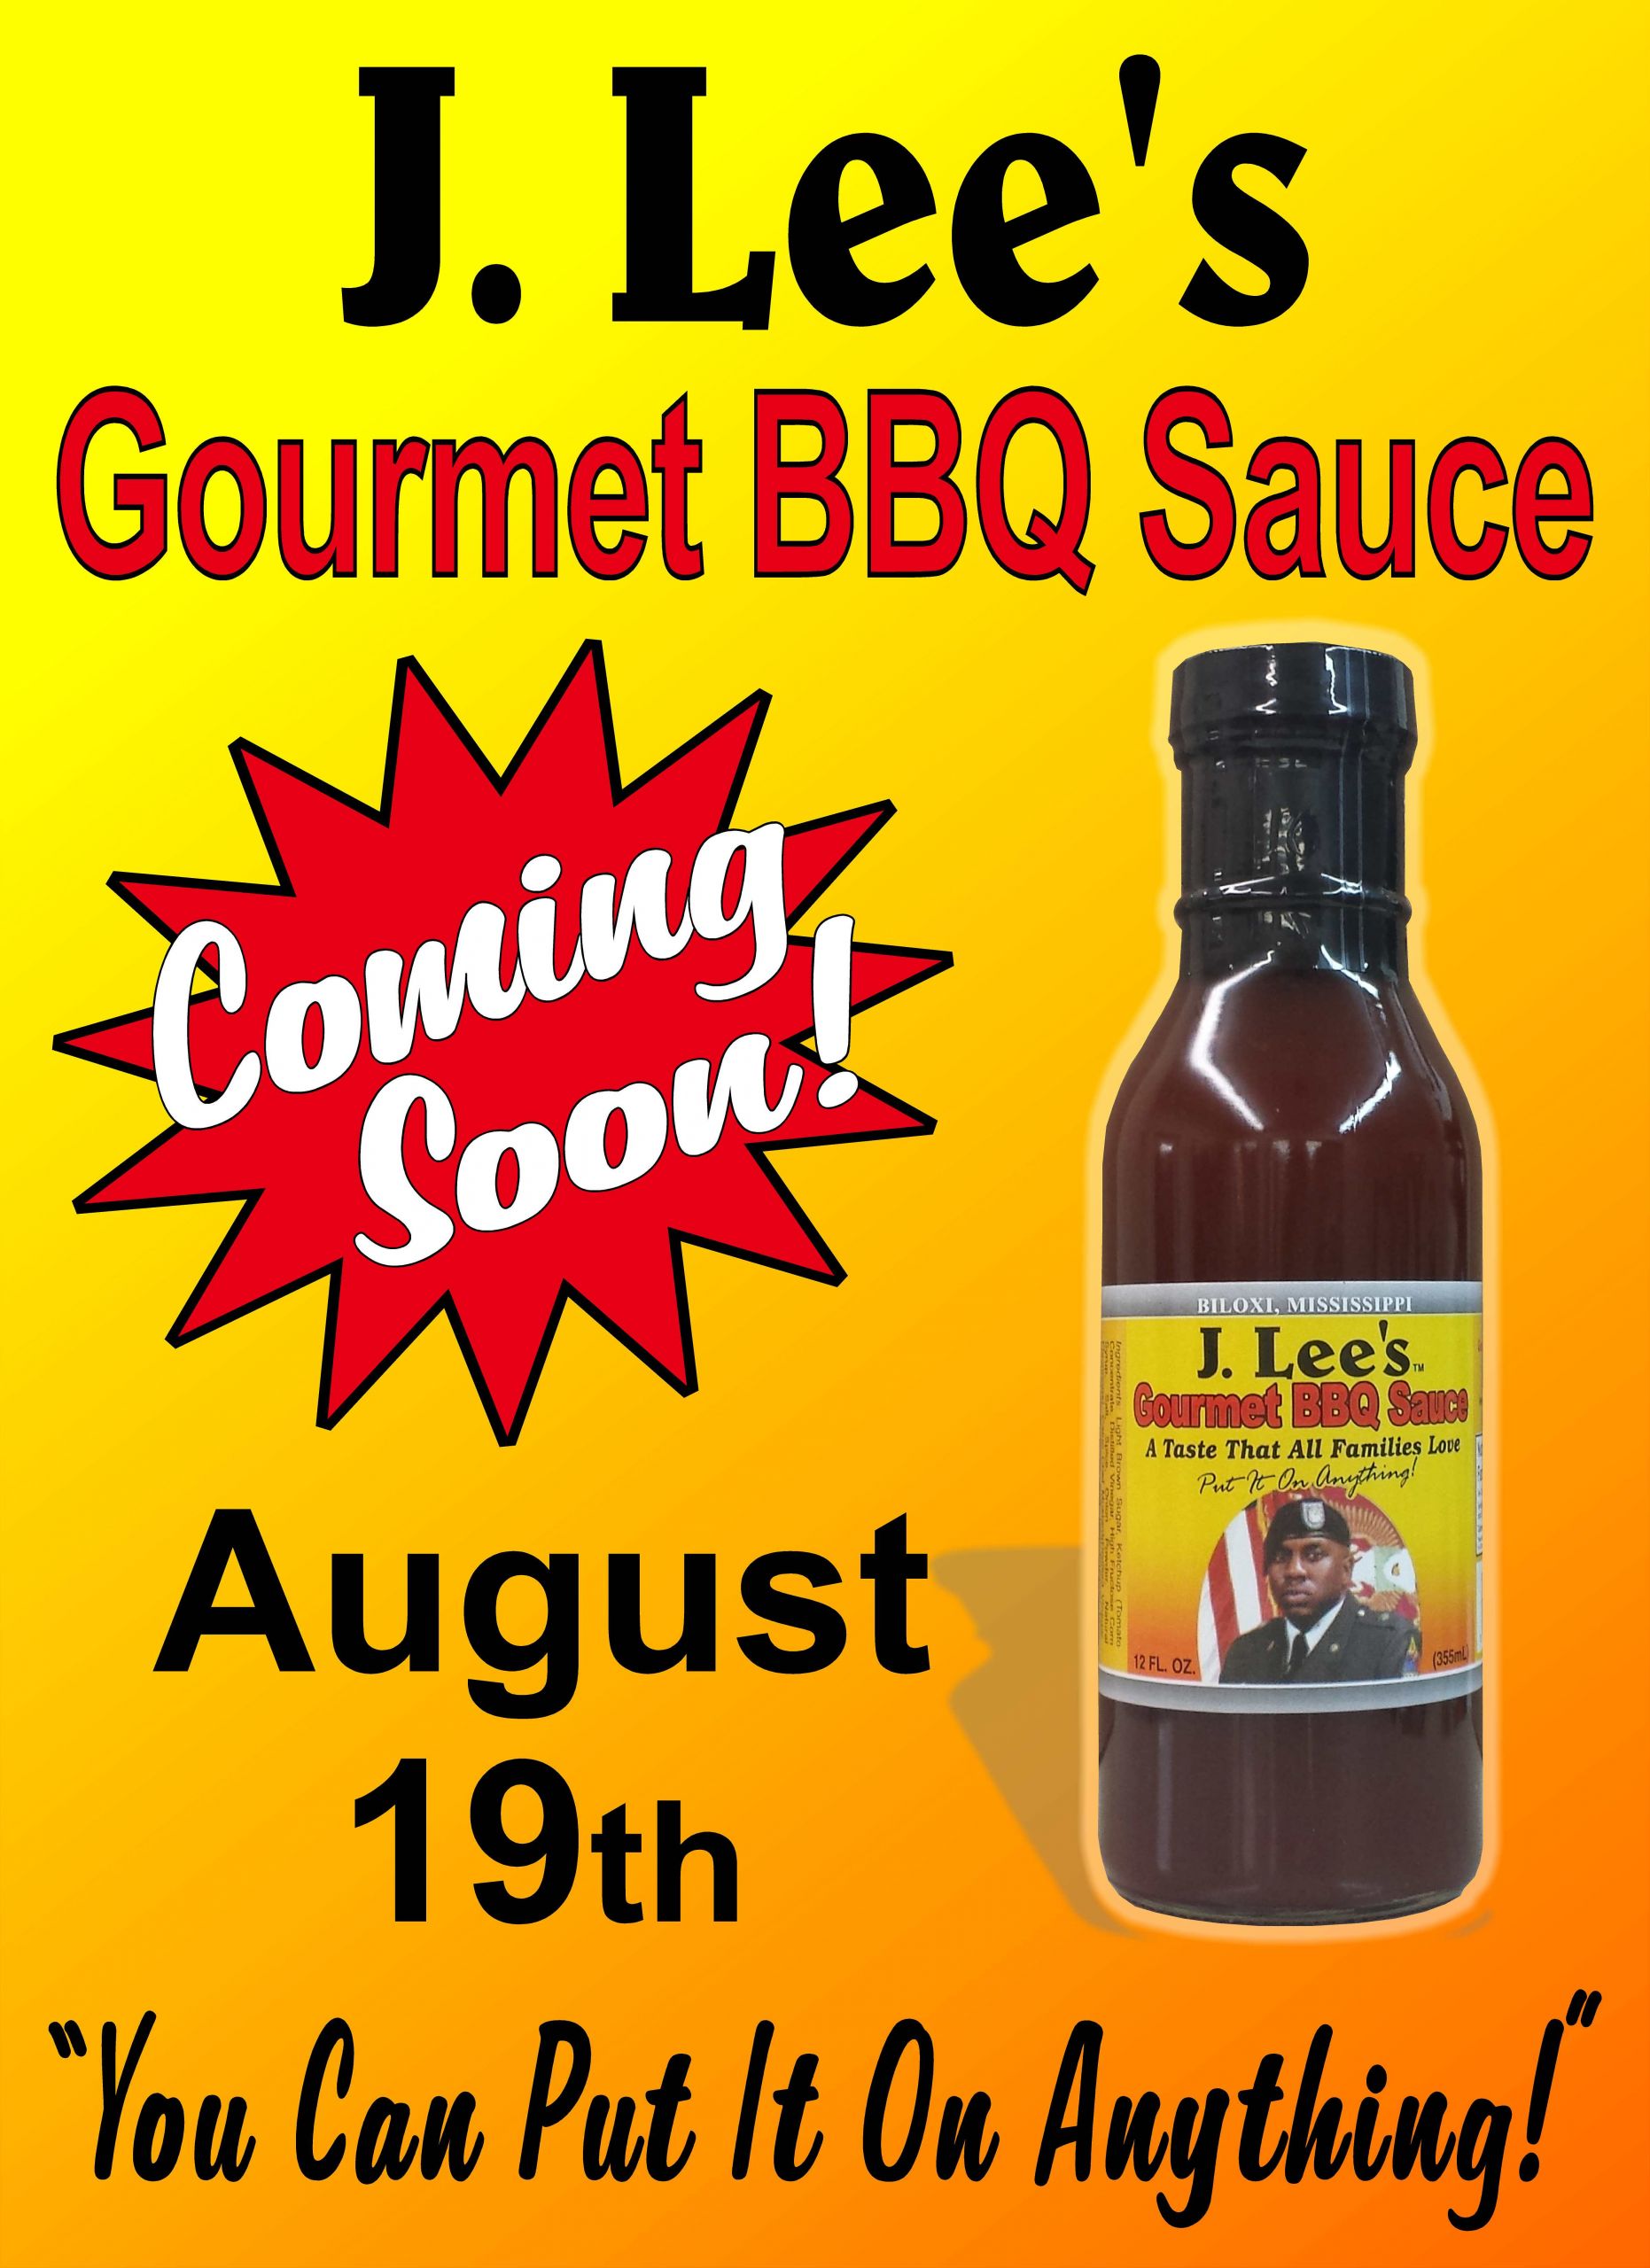 J Lees Gourmet Bbq Sauce
 J Lee’s Gourmet BBQ Sauce Joins Forces with the Defense